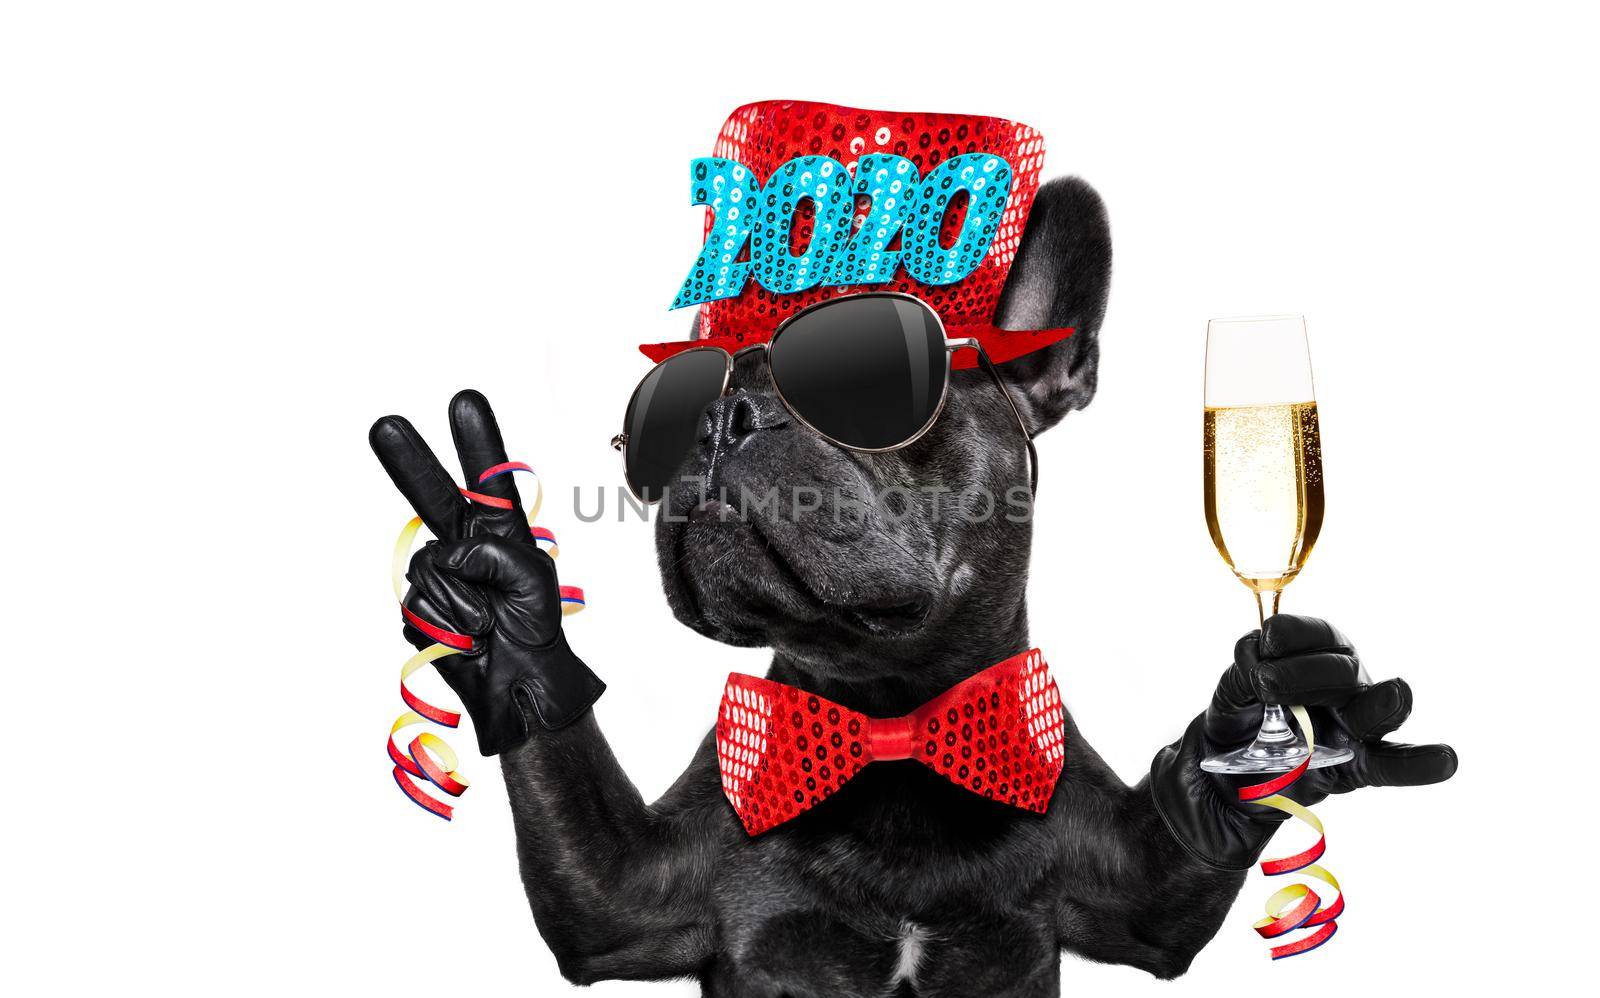 happy new year dog celberation by Brosch